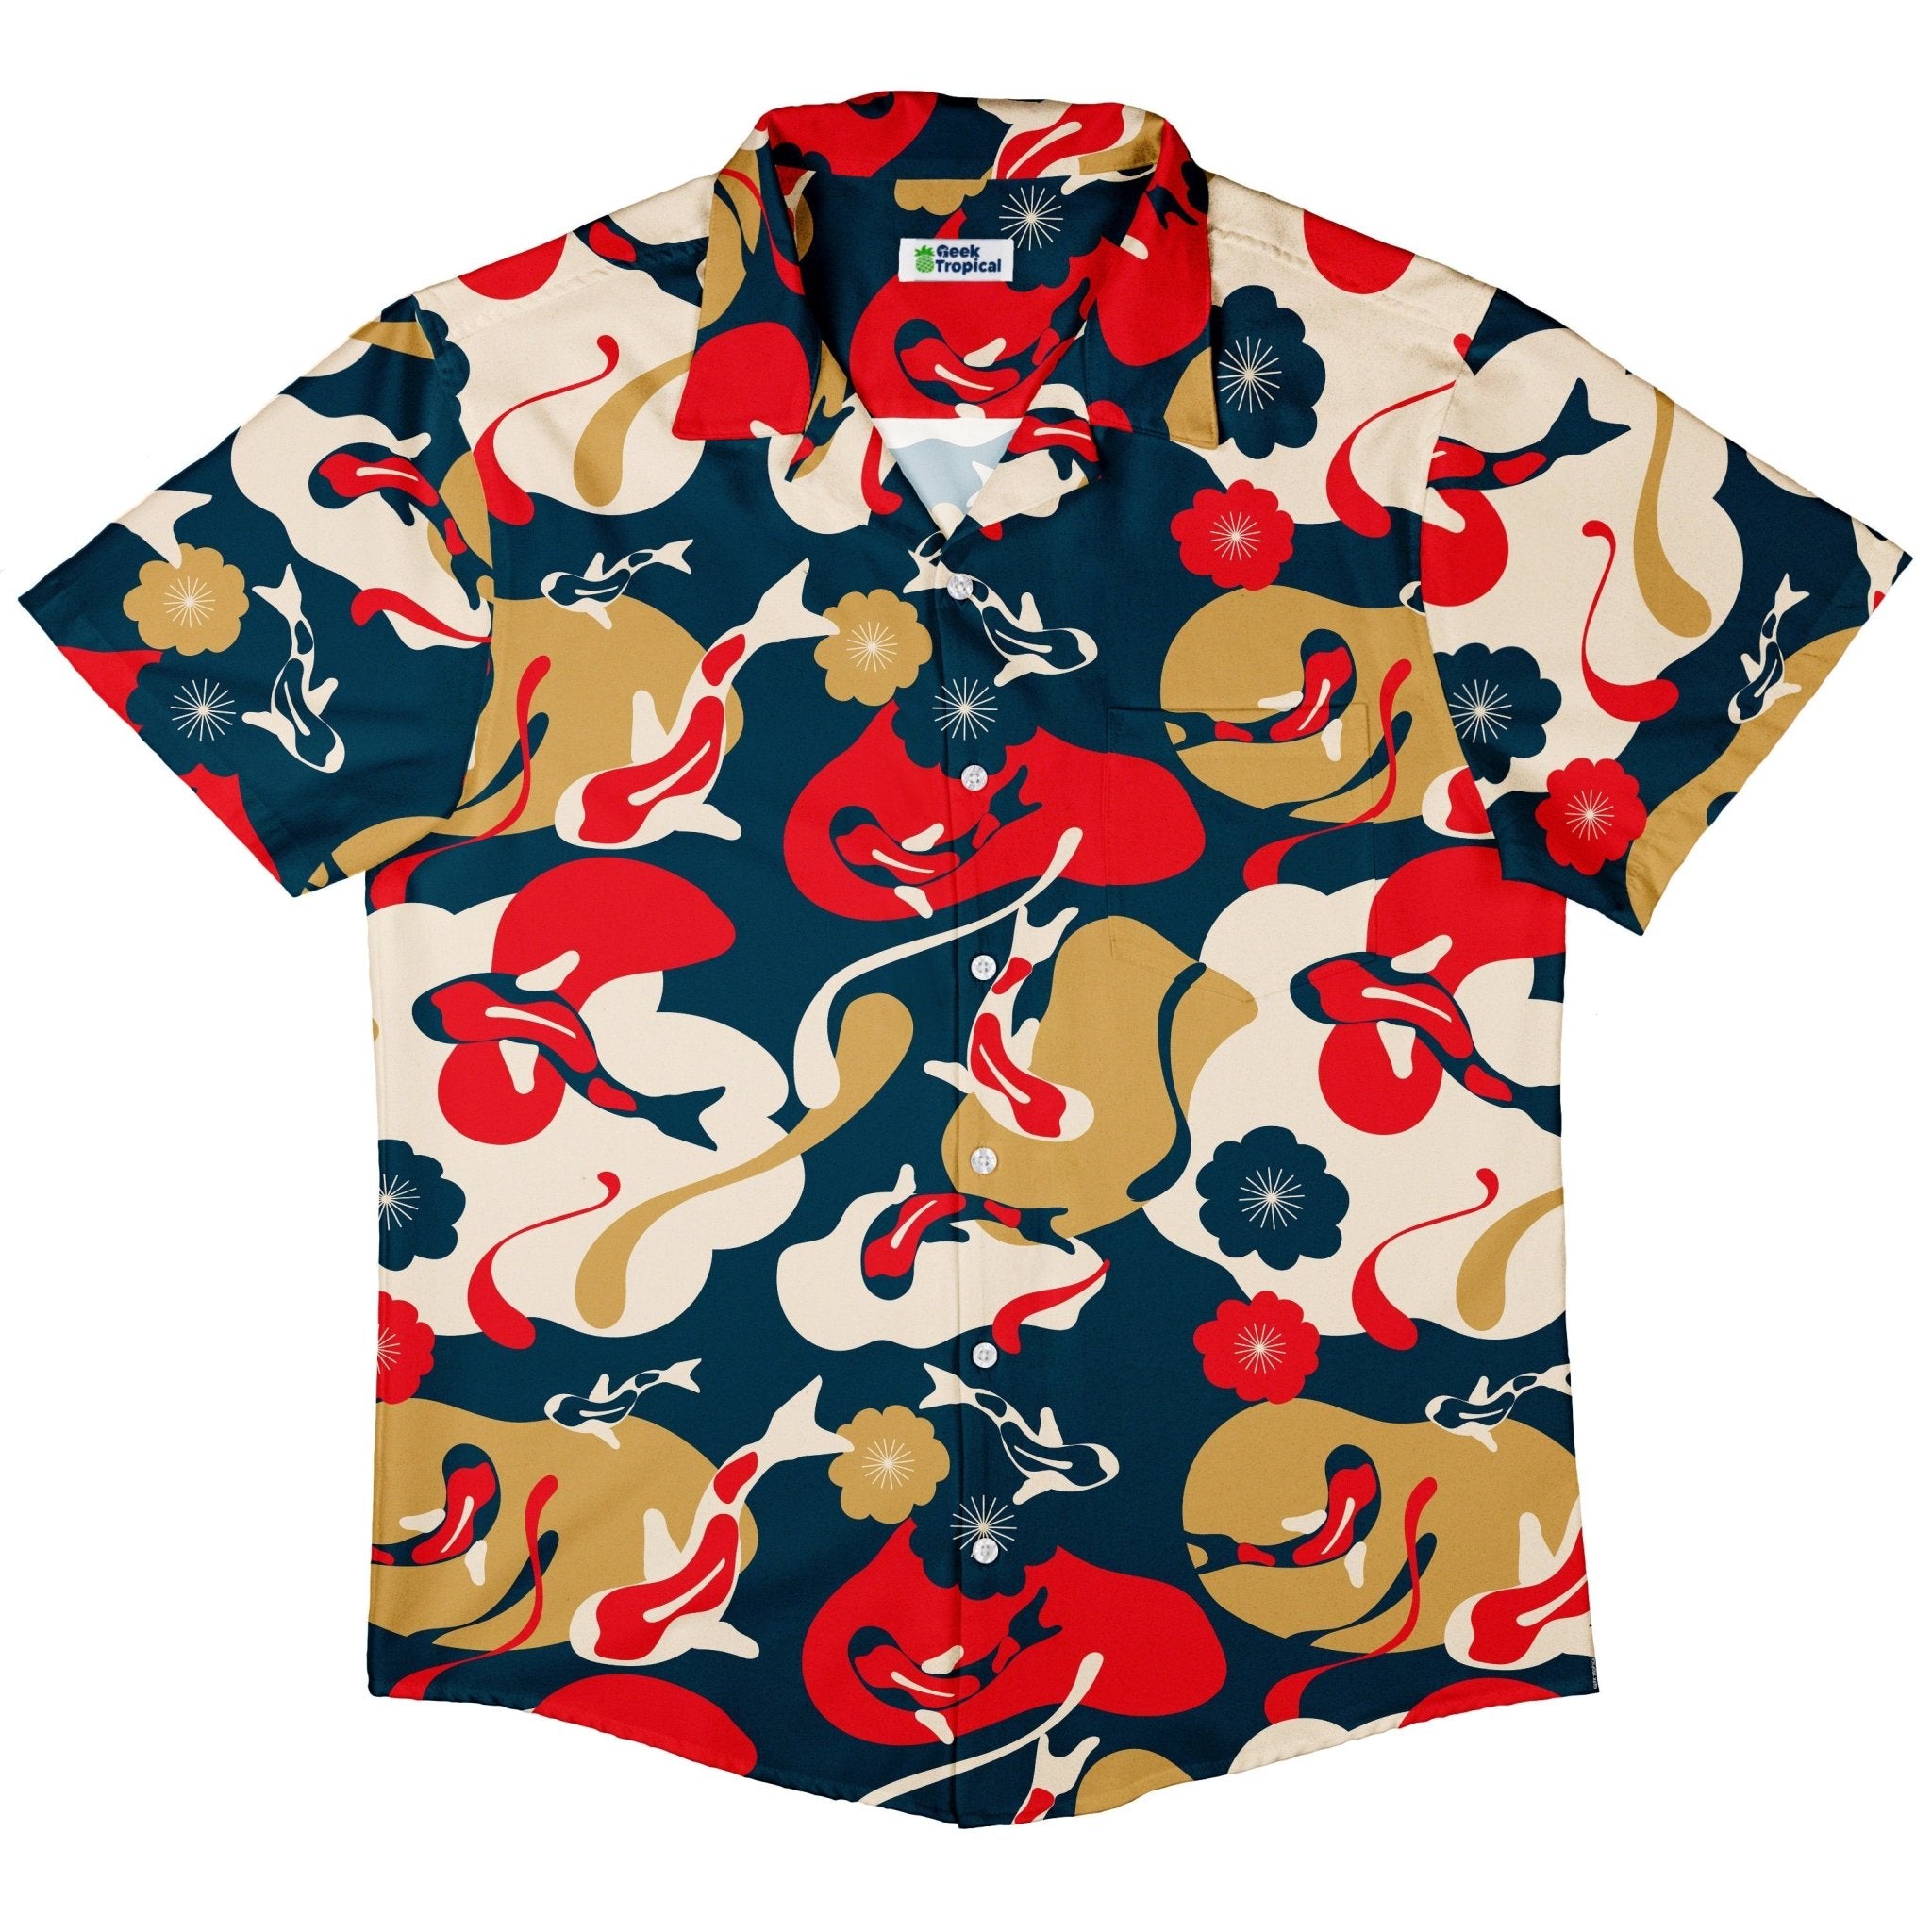 Modern Koi Button Up Shirt - adult sizing - Anime - Design by Claire Murphy